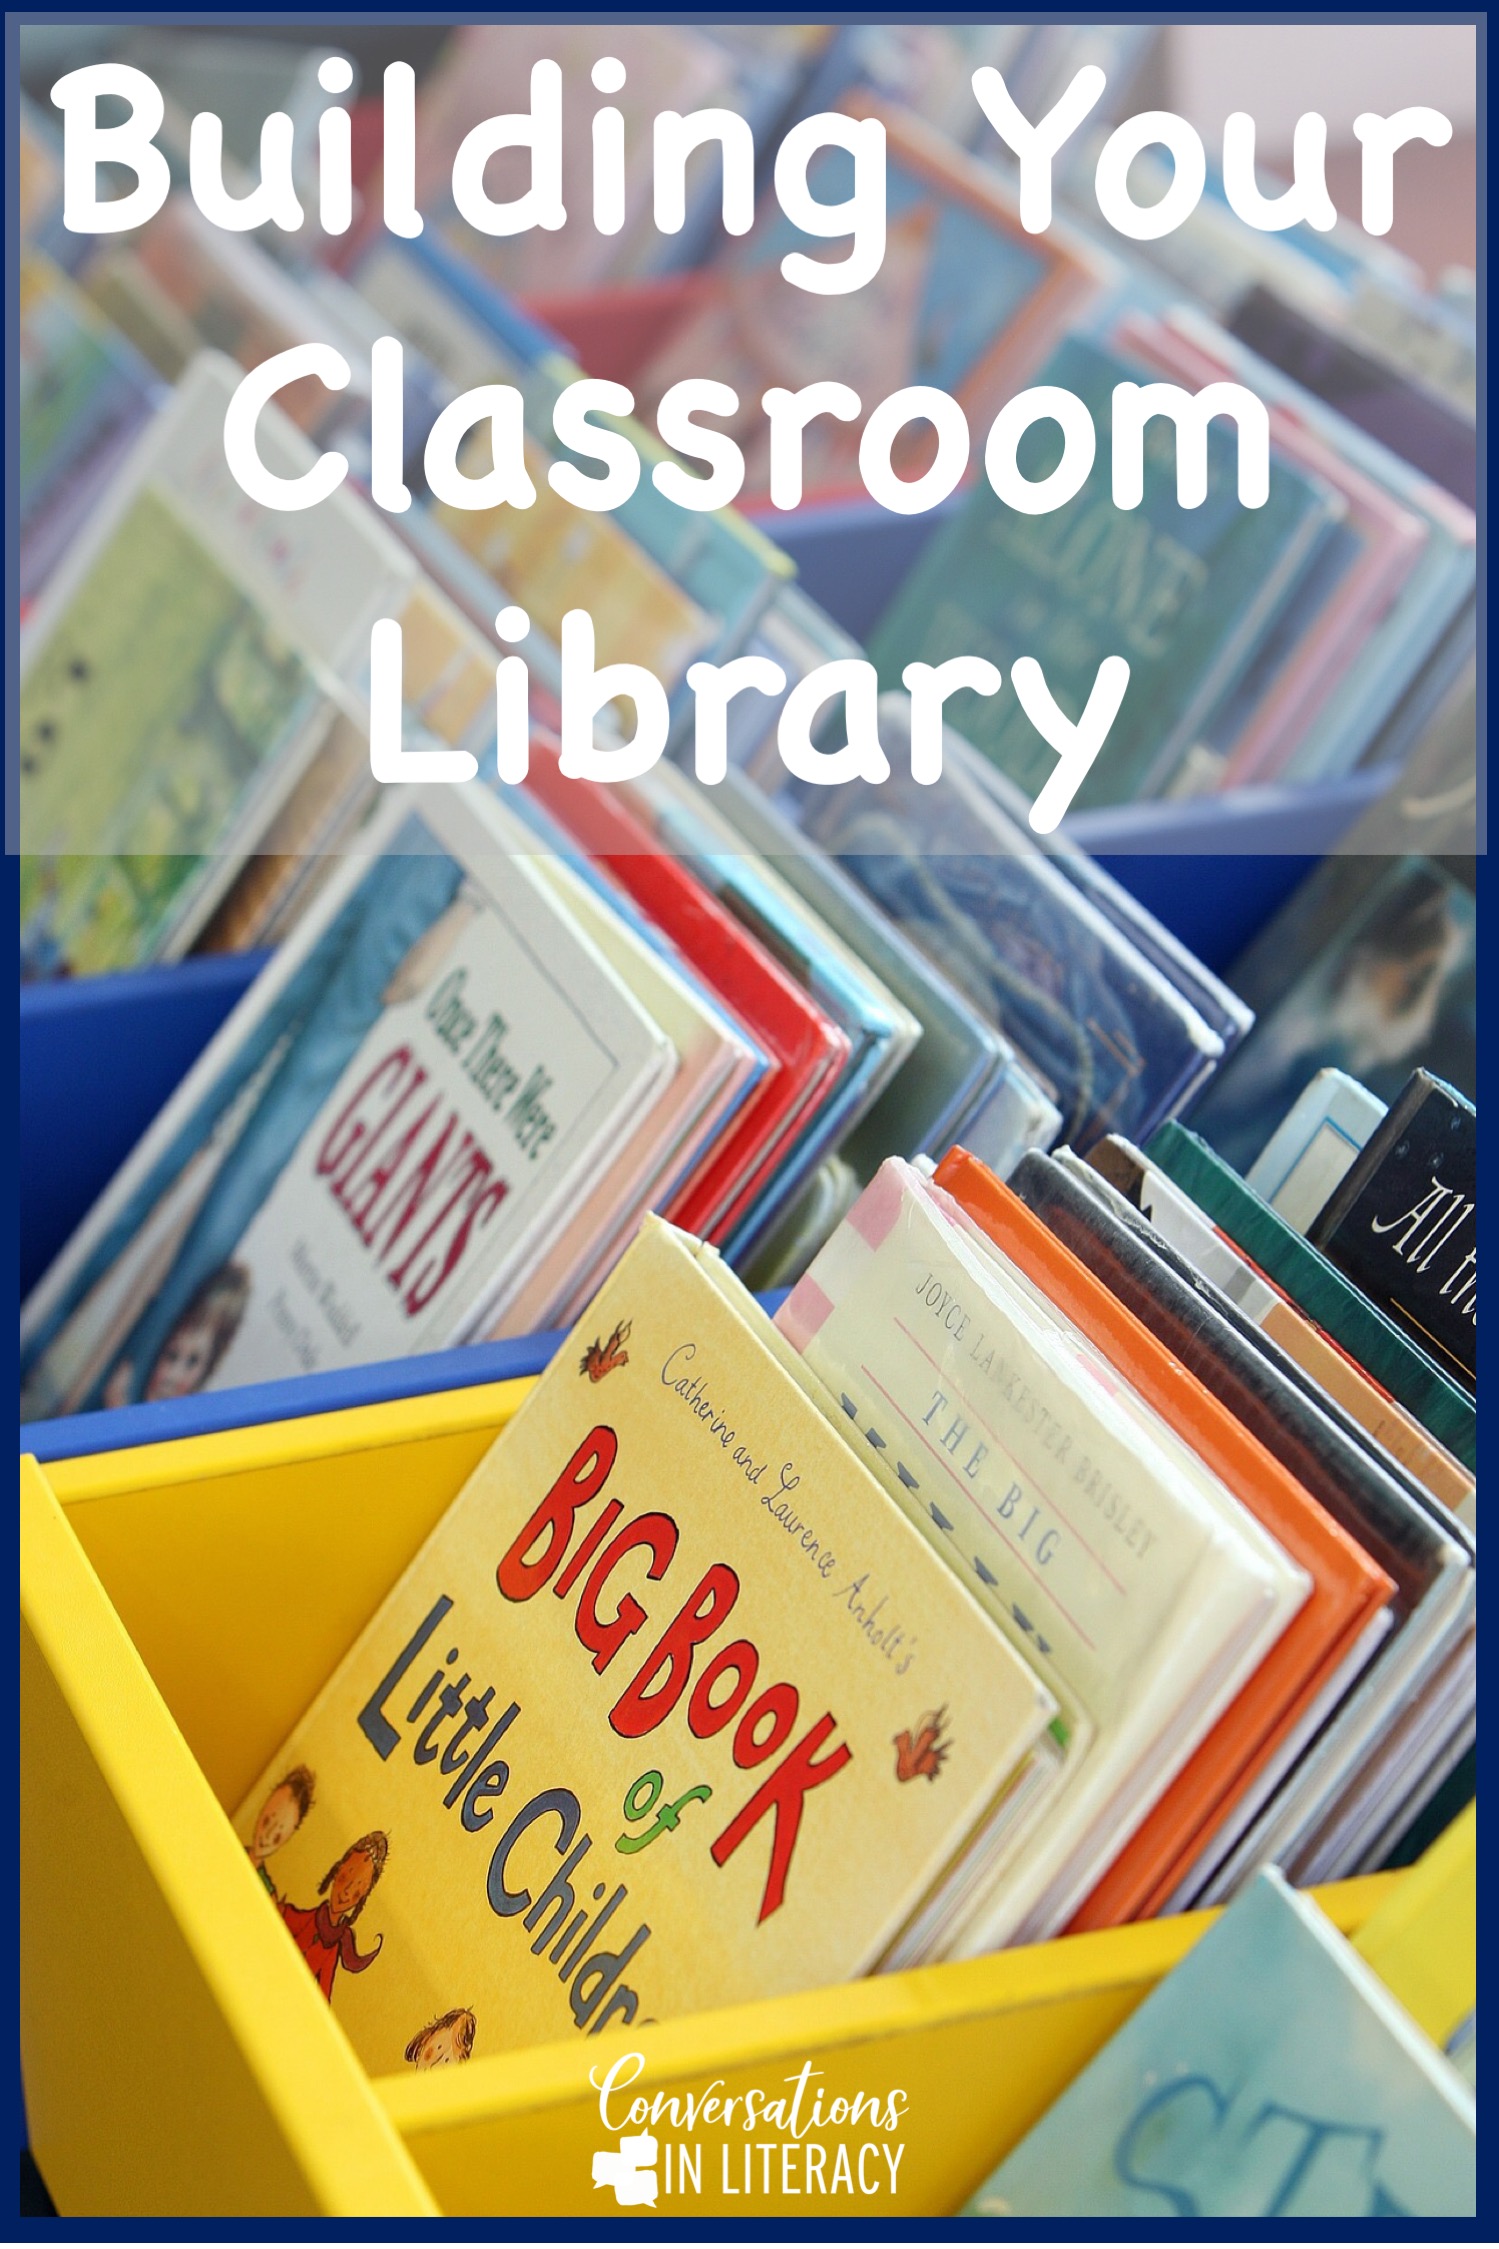 Building A Classroom Library - Conversations in Literacy